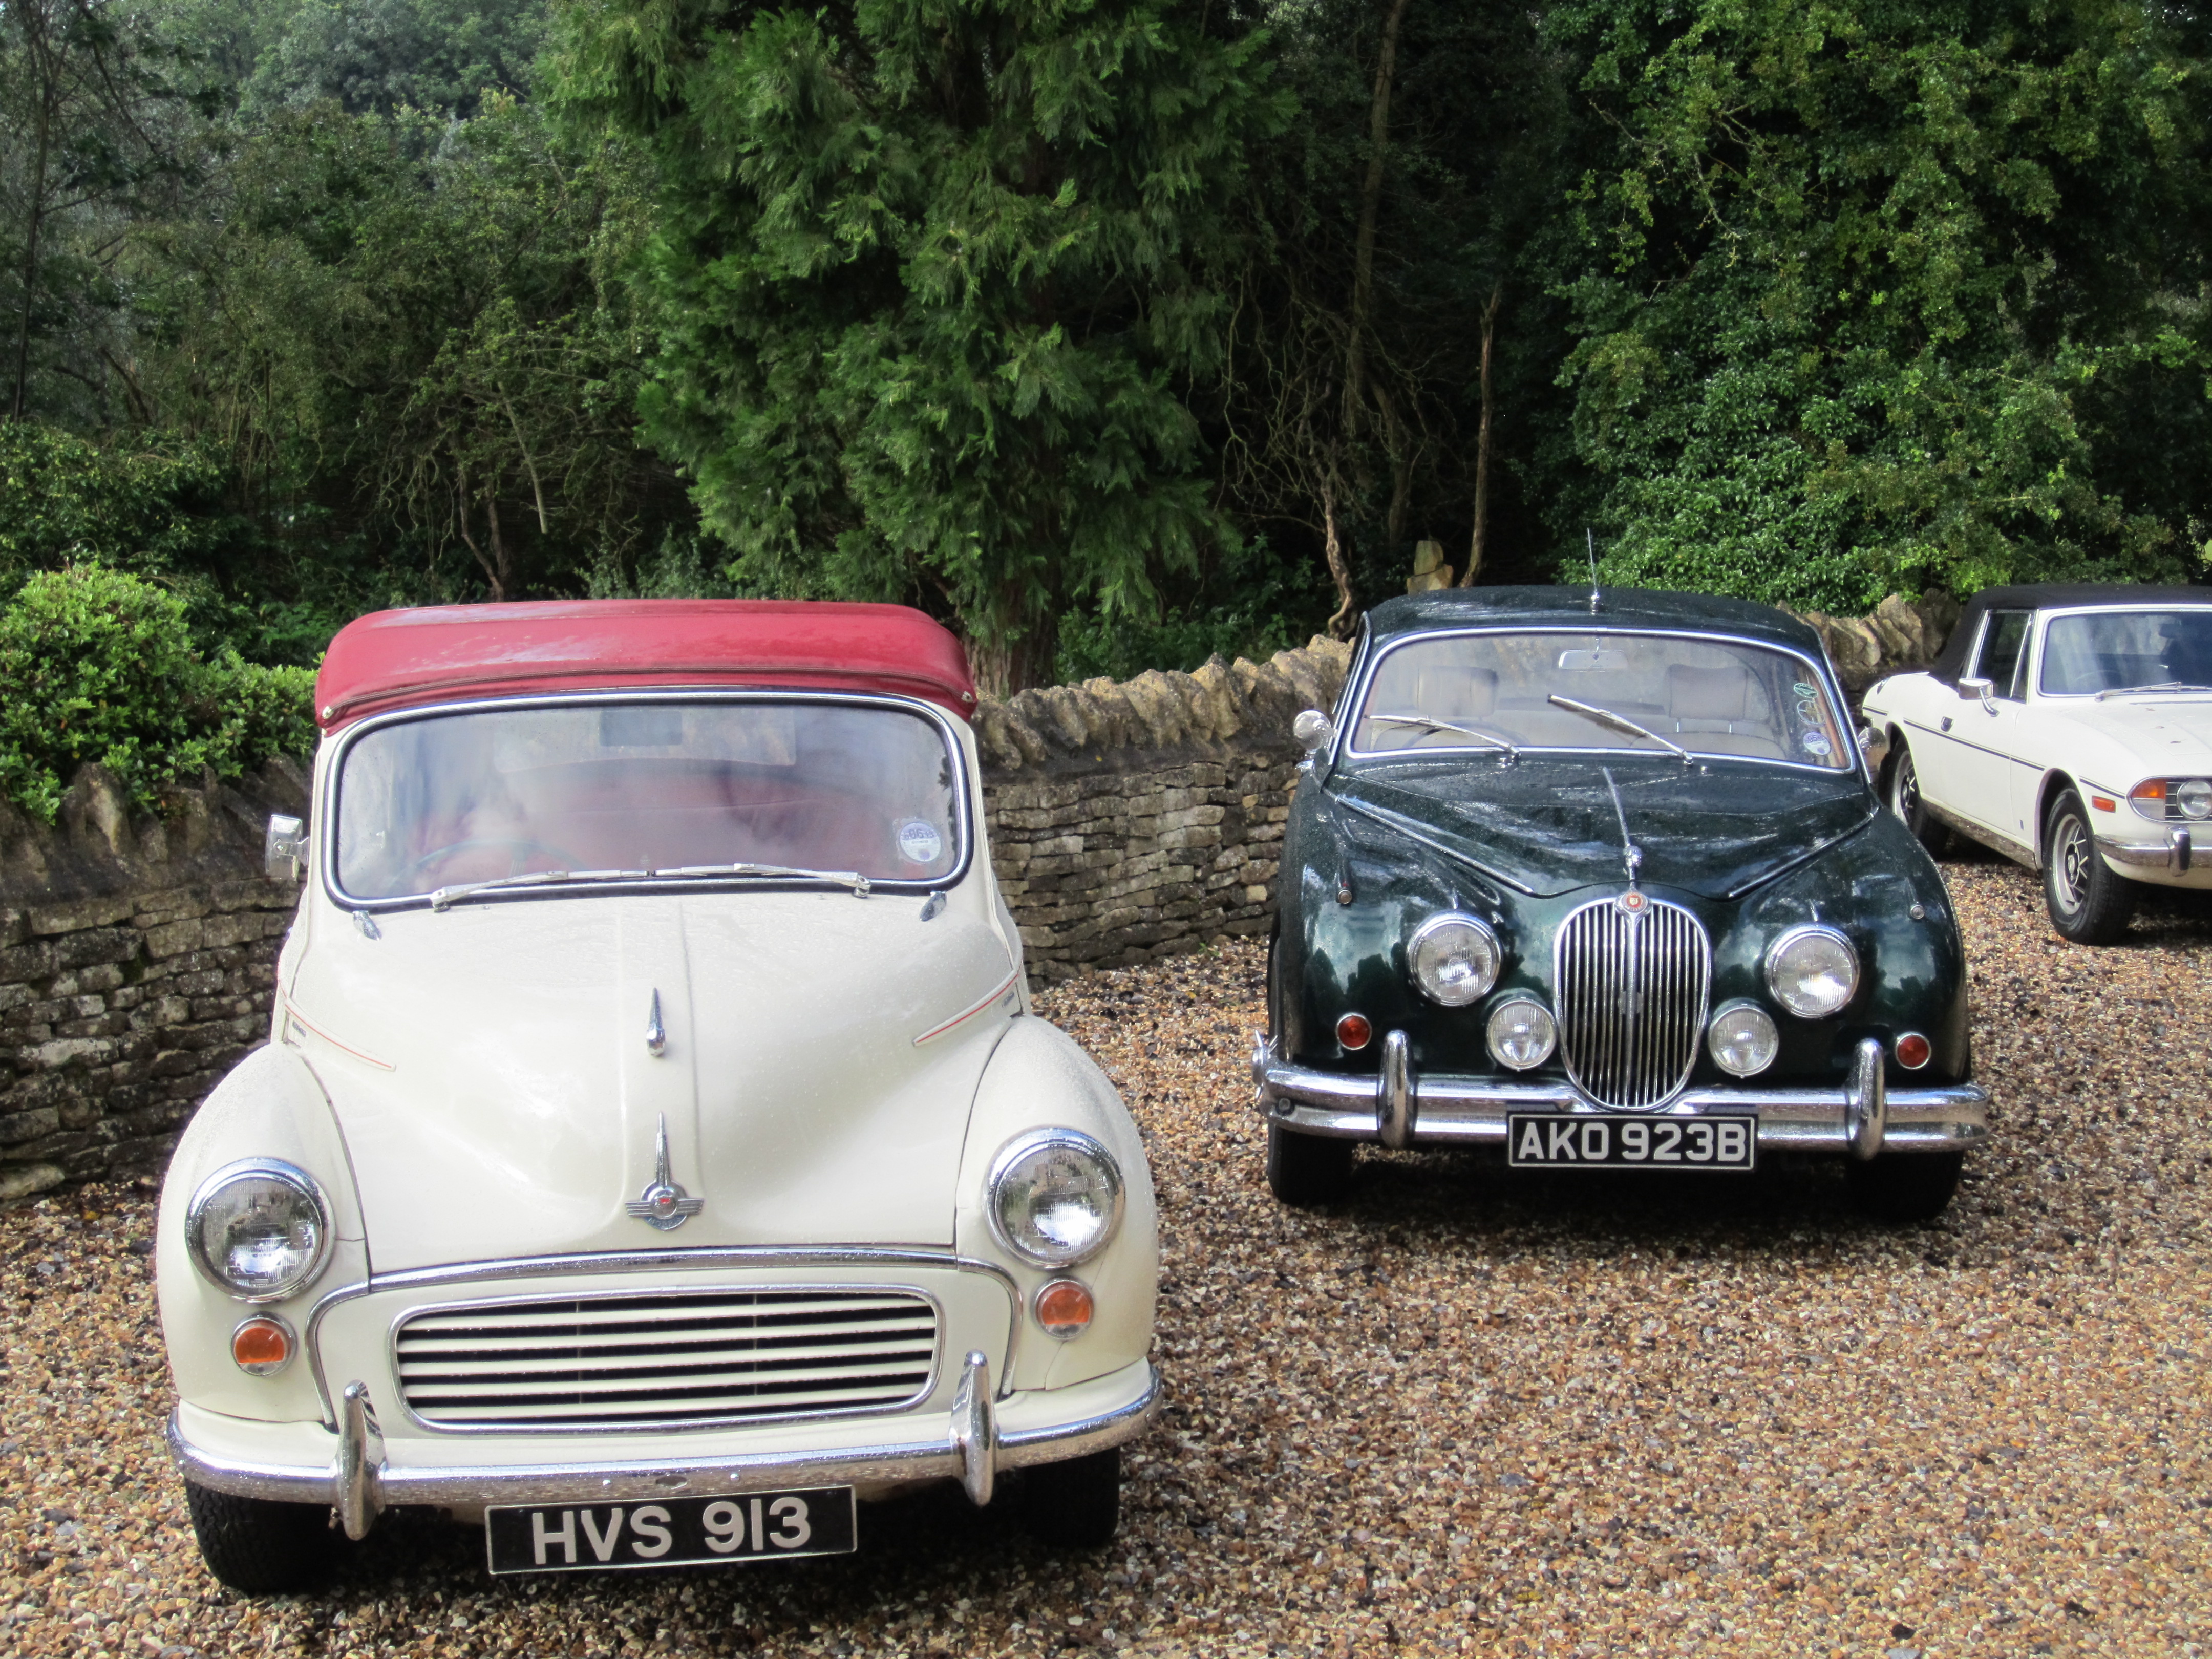 Rent or Buy – We help you decide on the Right Classic Car 4U